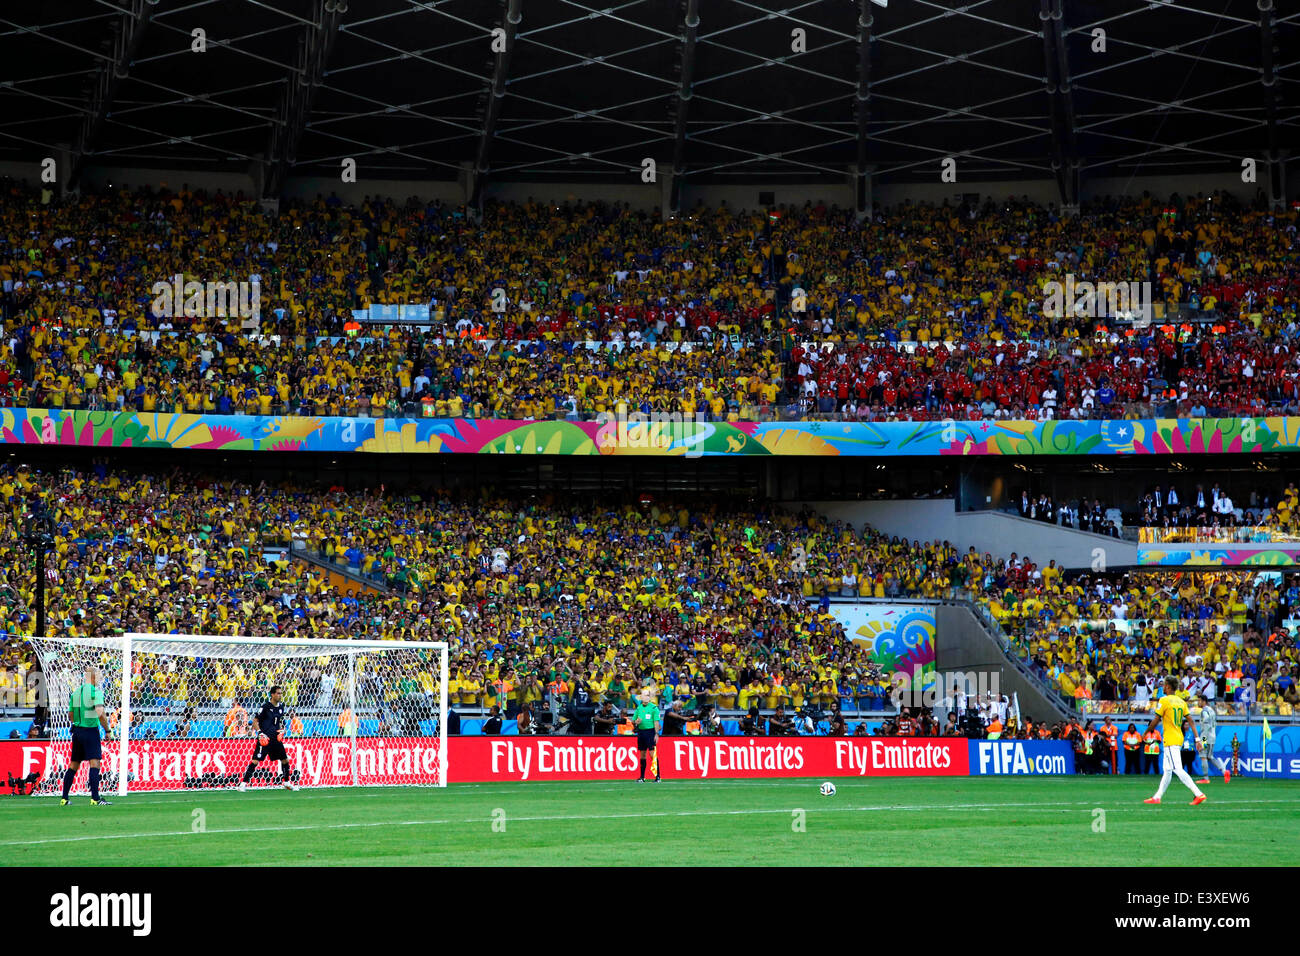 Belo Horizonte, Brazil. © D. 28th June, 2014. Claudio Bravo (CHI), Neymar (BRA) Football/Soccer : Neymar of Brazil scores his penalty shoot out during the FIFA World Cup Brazil 2014 Round of 16 match between Brazil 1(3-2)1 Chile at Estadio Mineirao in Belo Horizonte, Brazil. © D .Nakashima/AFLO/Alamy Live News Stock Photo